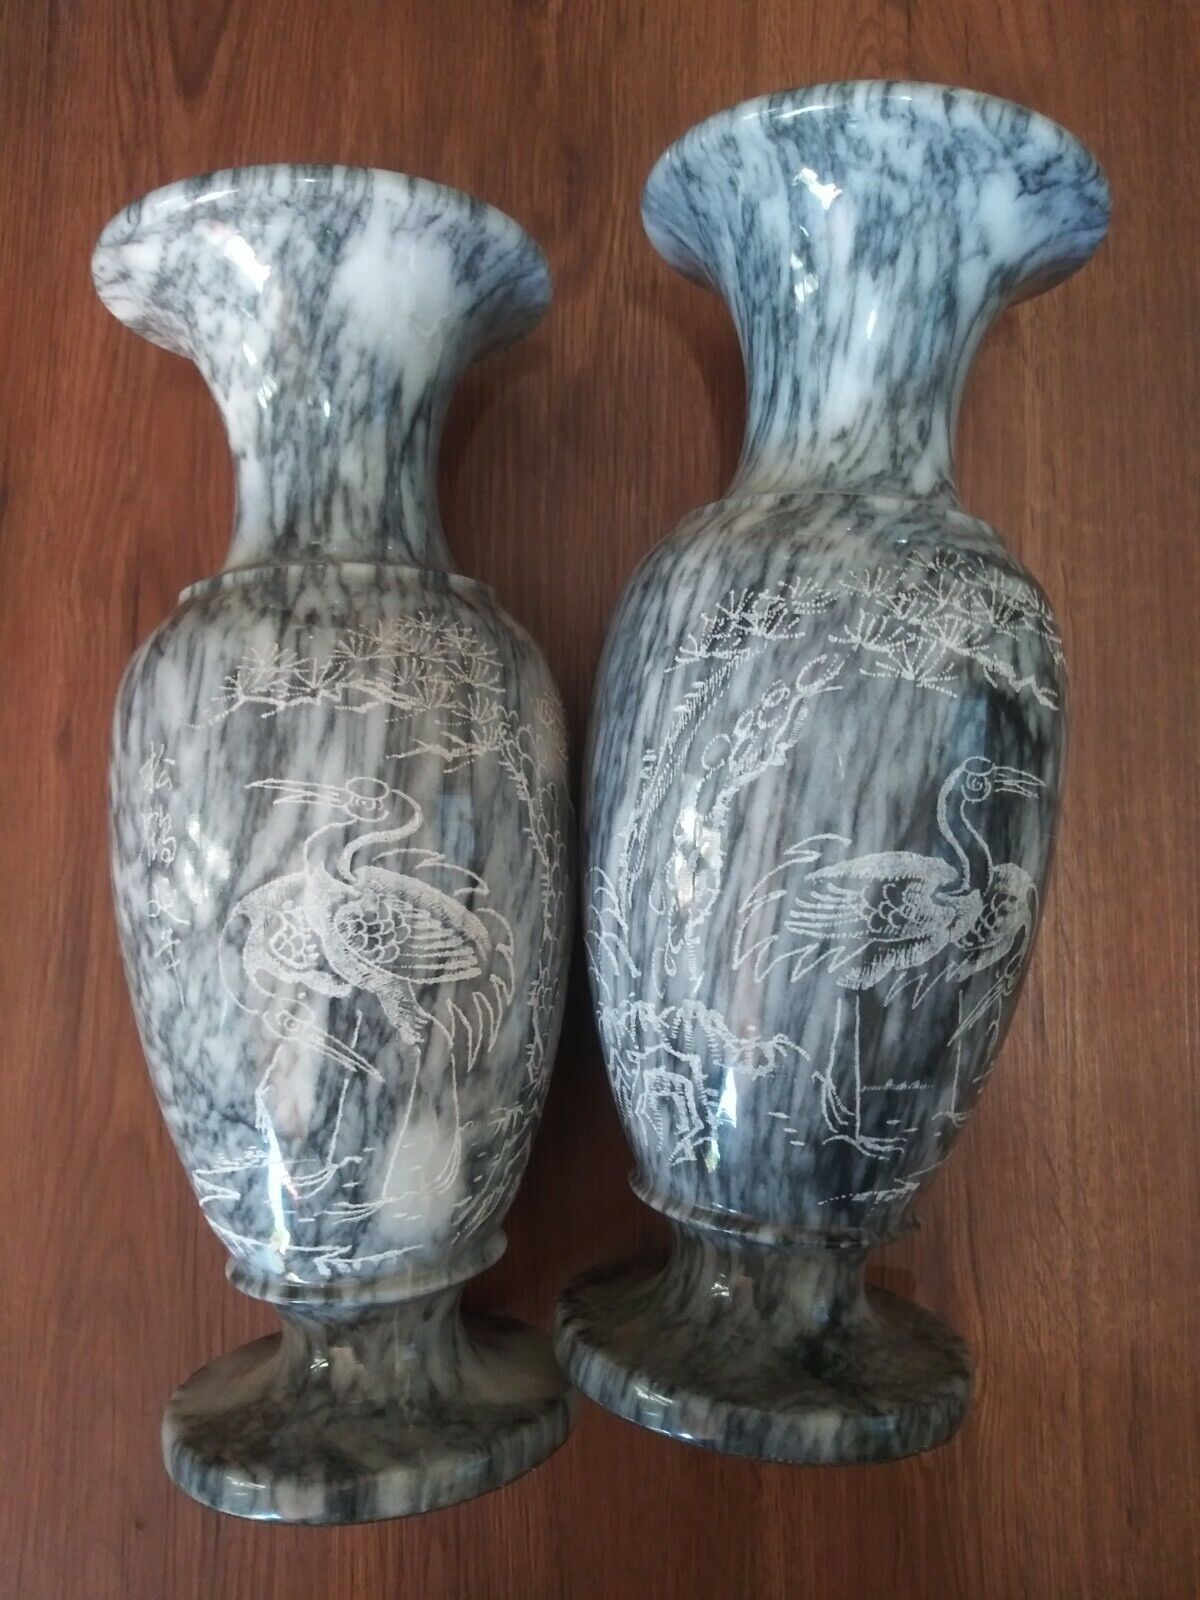 Vintage 1960s Pair Of Etched Marble Vases With Herons. Design. 12.5 inches tall